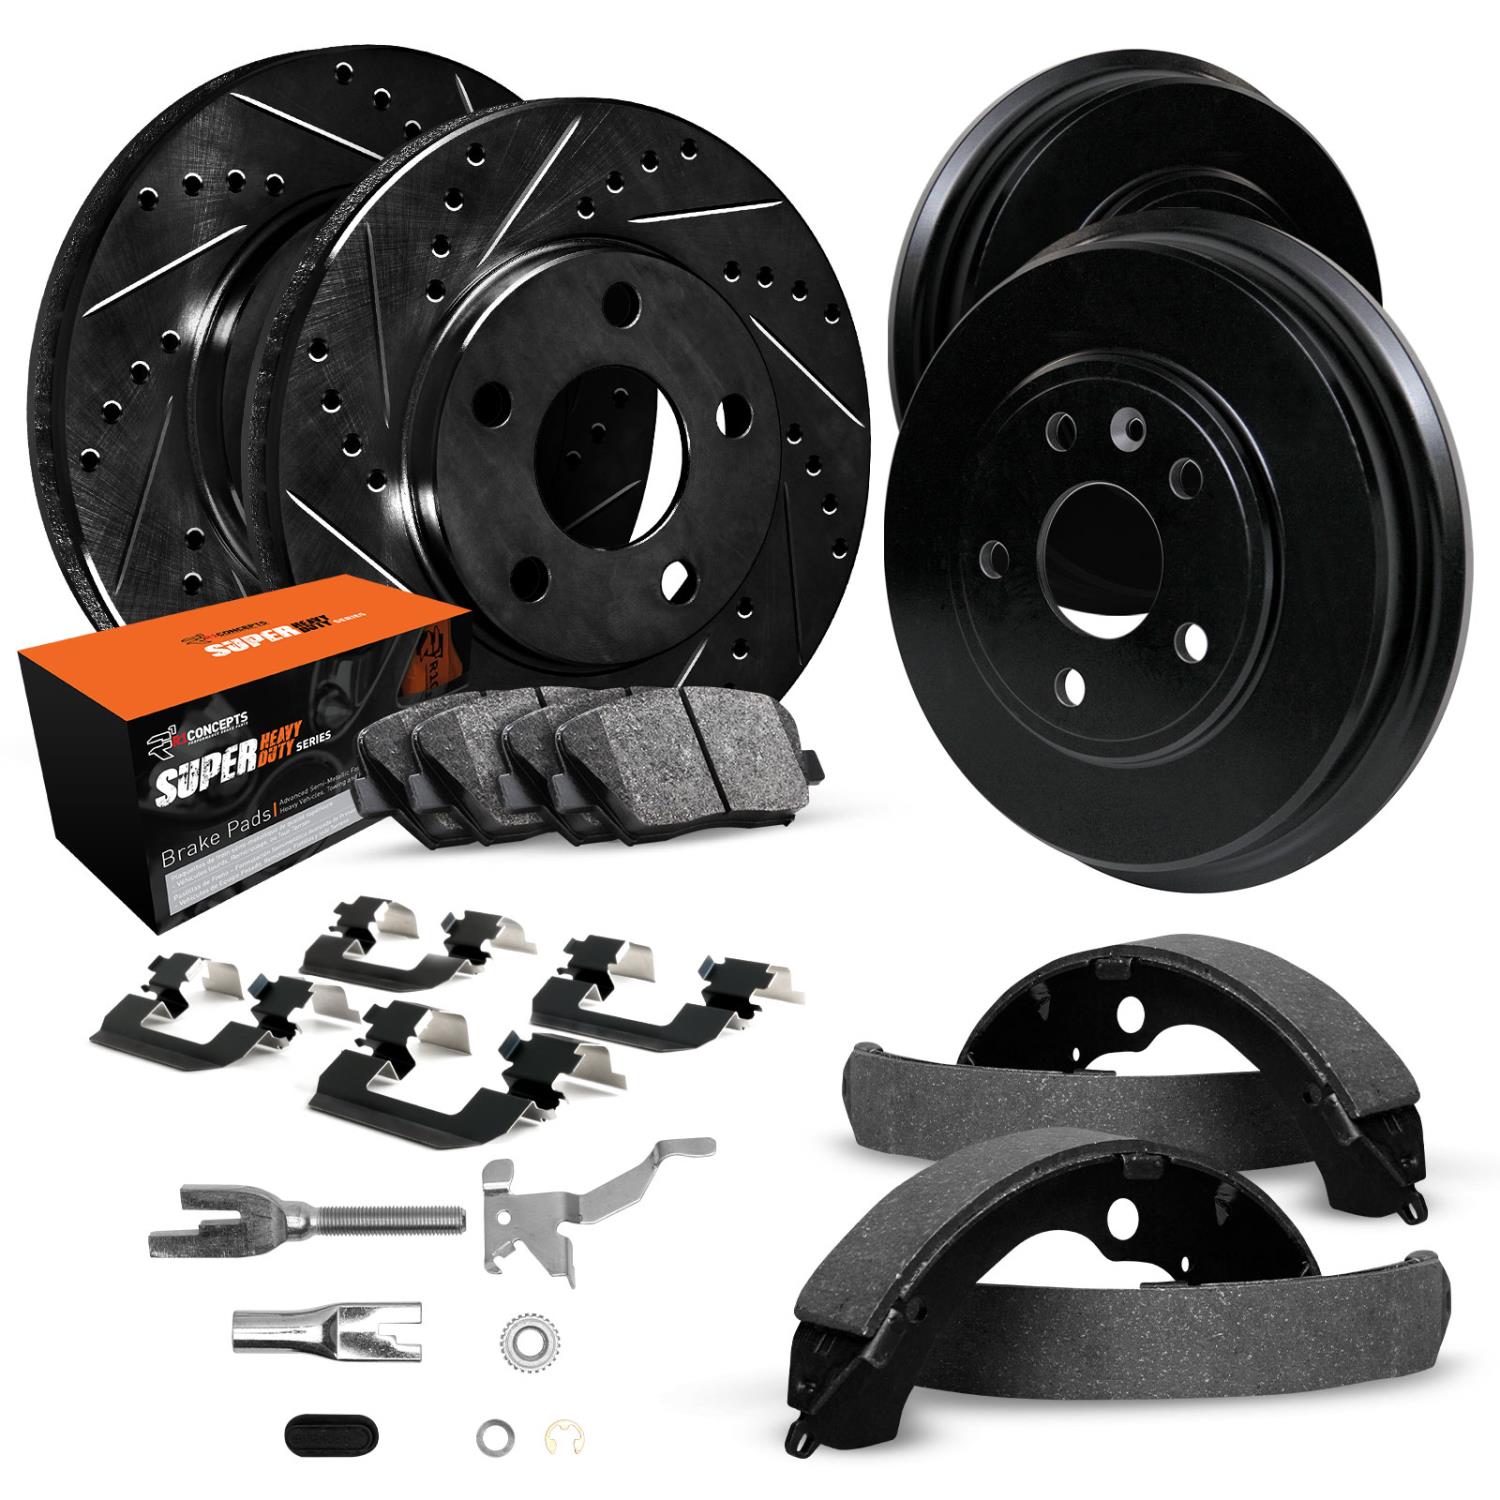 E-Line Drilled/Slotted Black Rotor & Drum Set w/Super-Duty Pads, Shoes, Hardware/Adjusters, 1994-1995 Ford/Lincoln/Mercury/Mazda